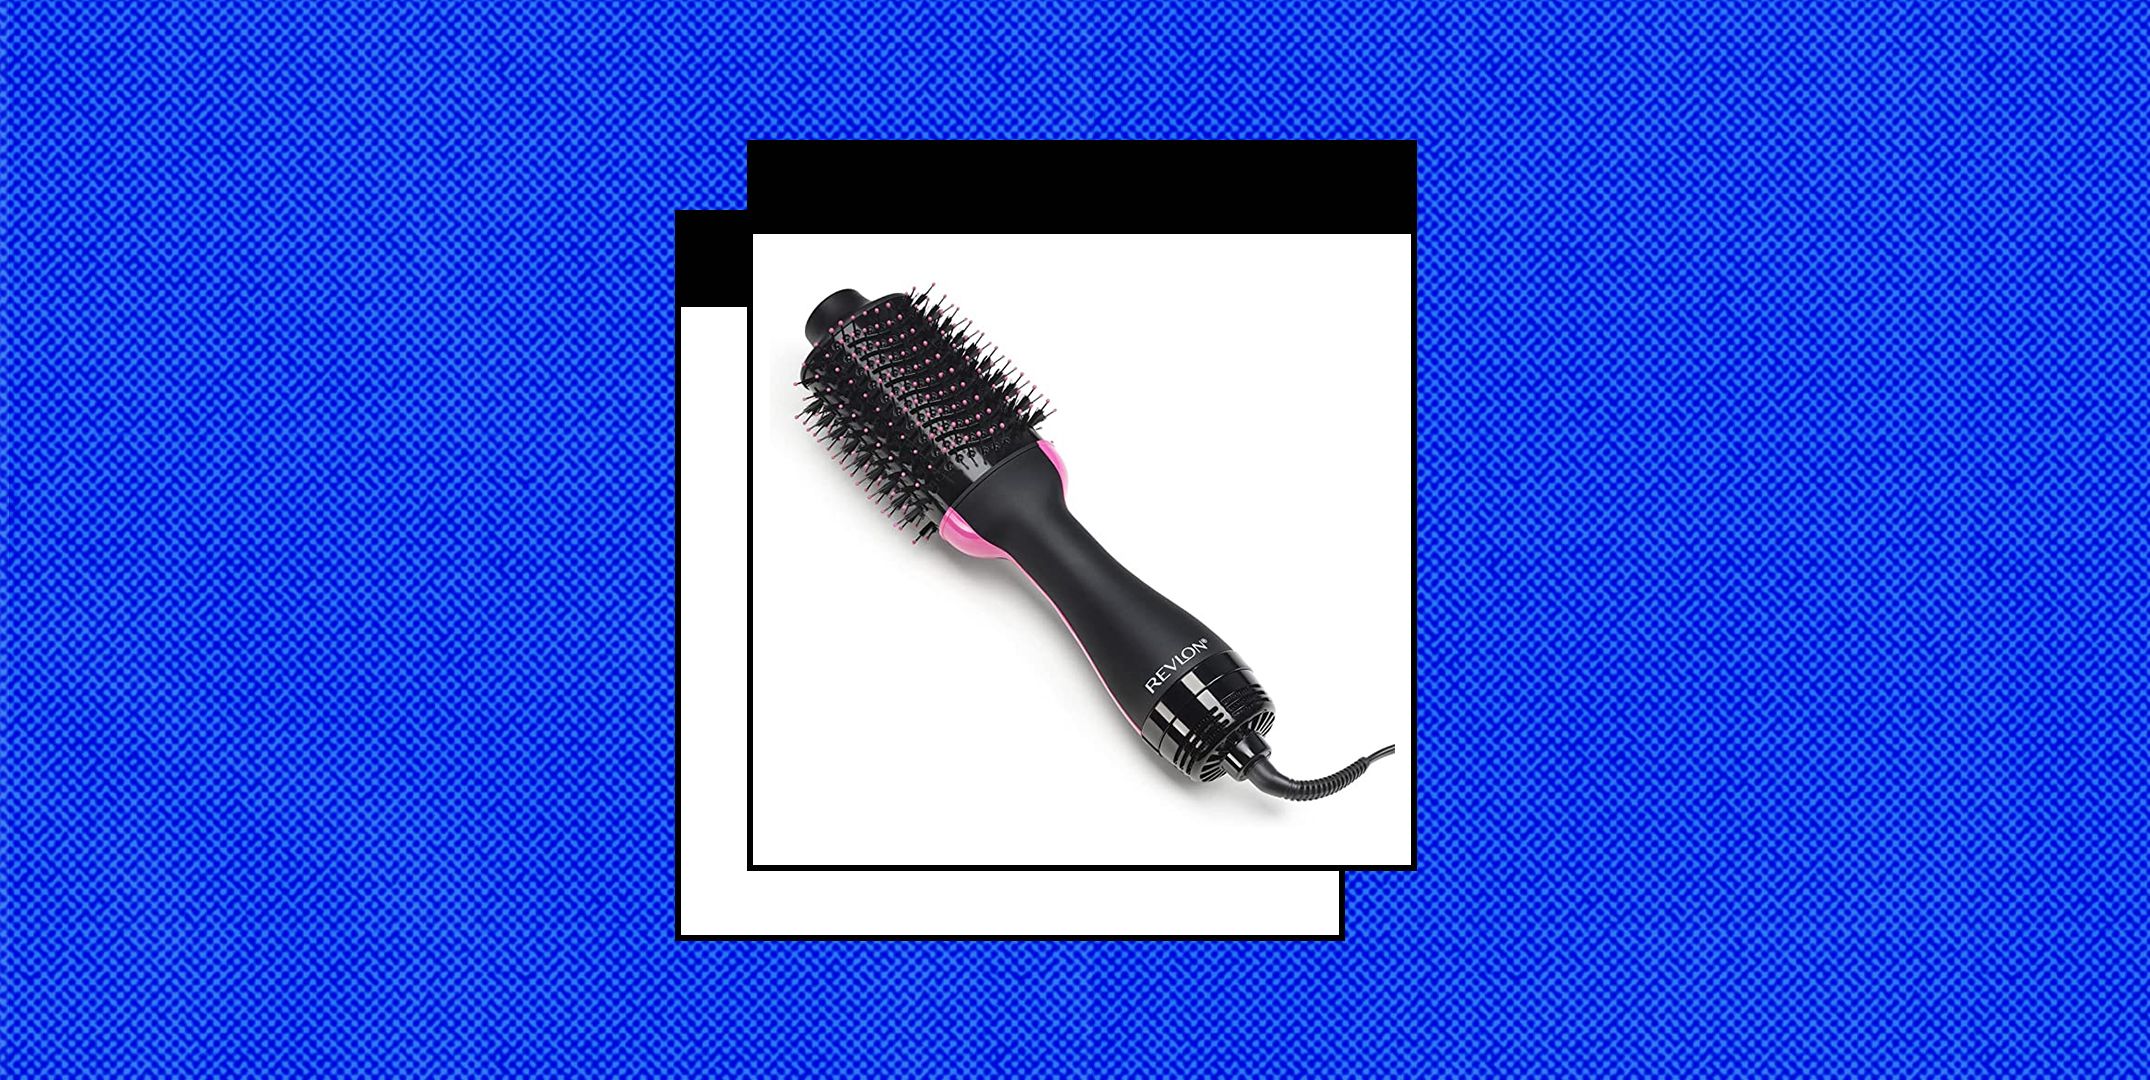 How To Use A Straightening Brush - 3 Easy Steps